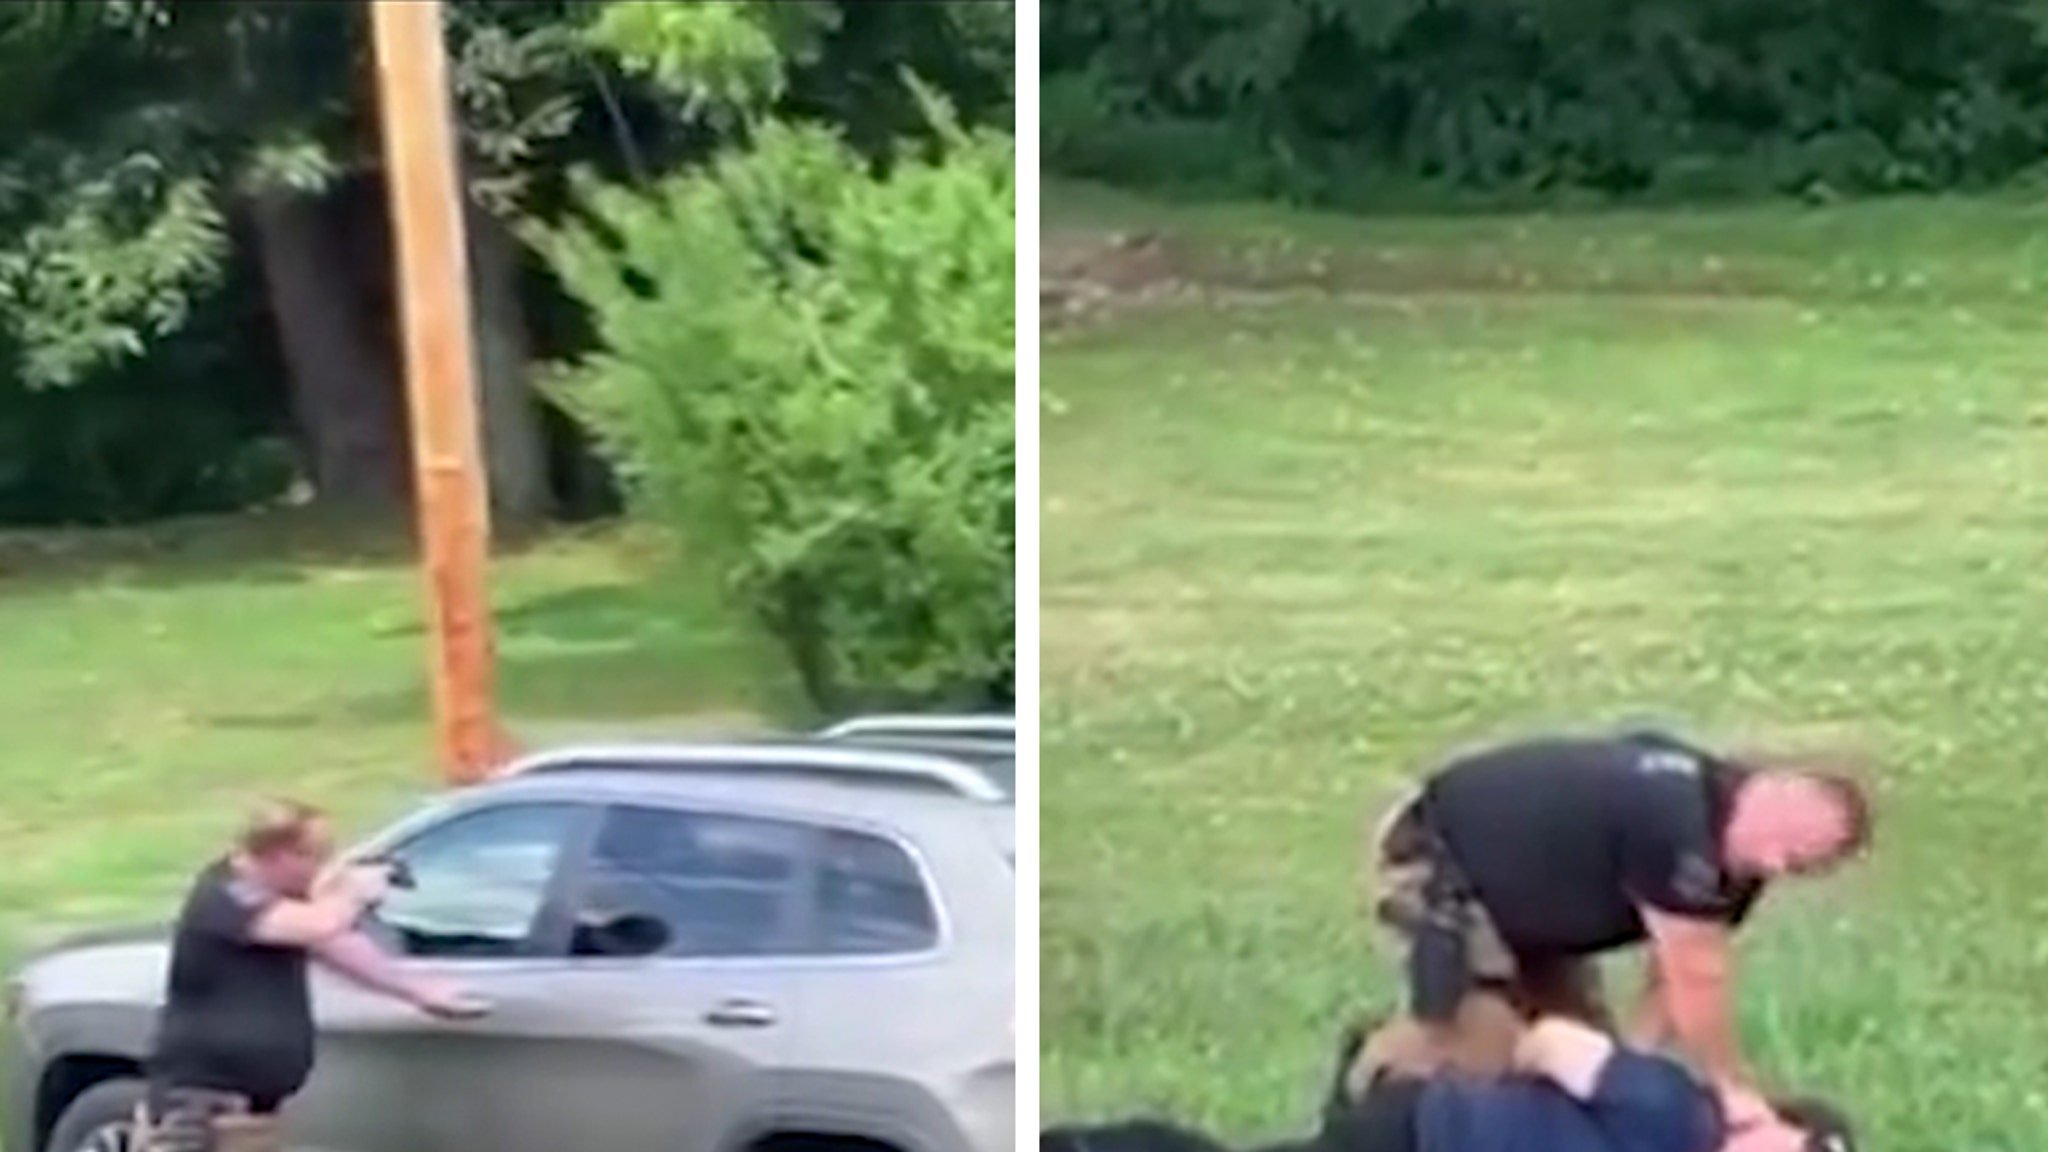 West Virginia Cop Threatens To Shoot Woman During Traffic Stop, Video Shows